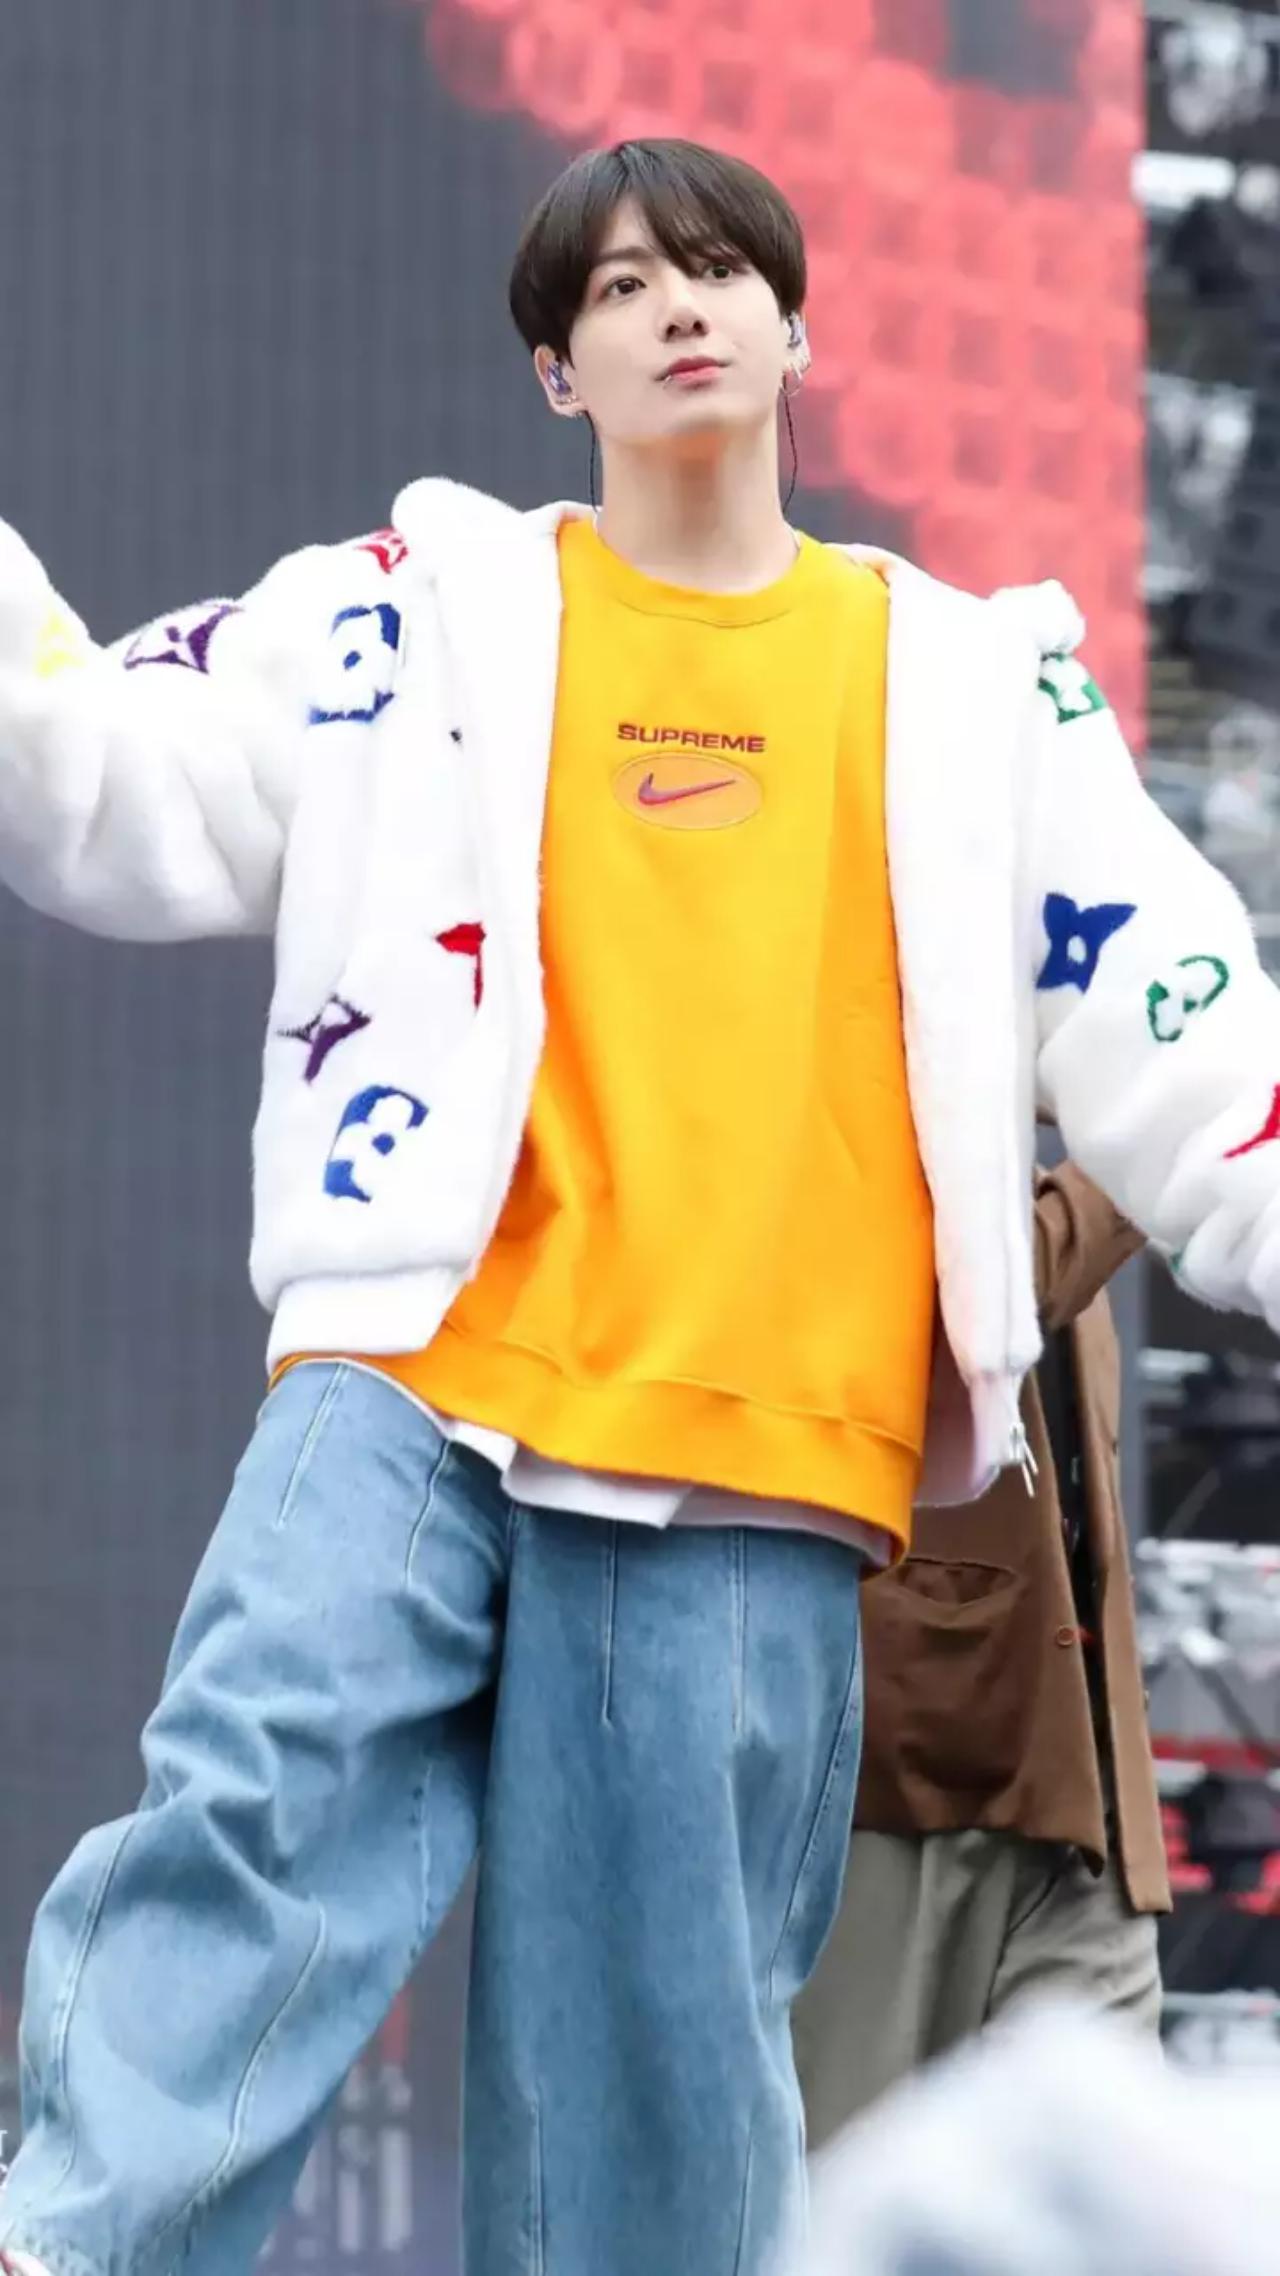 The baggy jeans make a stylish comeback when Jungkook wears them! In a rare moment, JK adds a pop of colour to his stage outfit and looks absolutely adorable in his orange t-shirt, fluffy white sweater and washed jeans